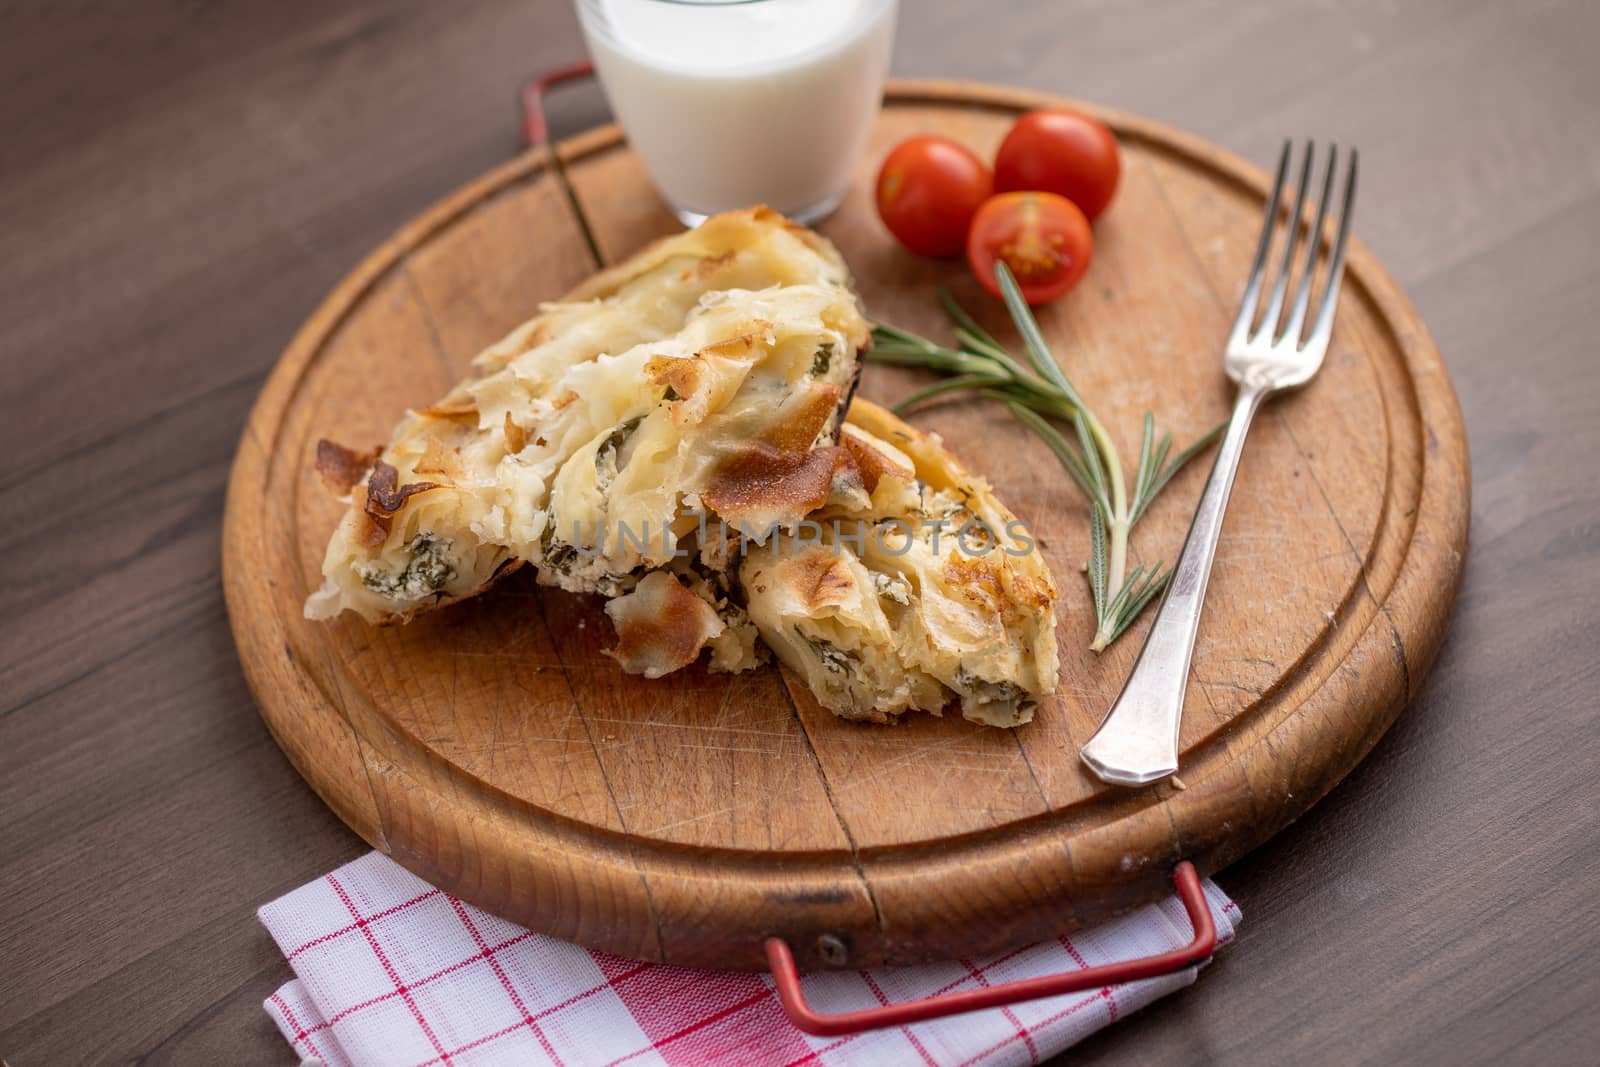 Traditional balkan breakfast - Burek pie with cheese and spinach served on vooden table